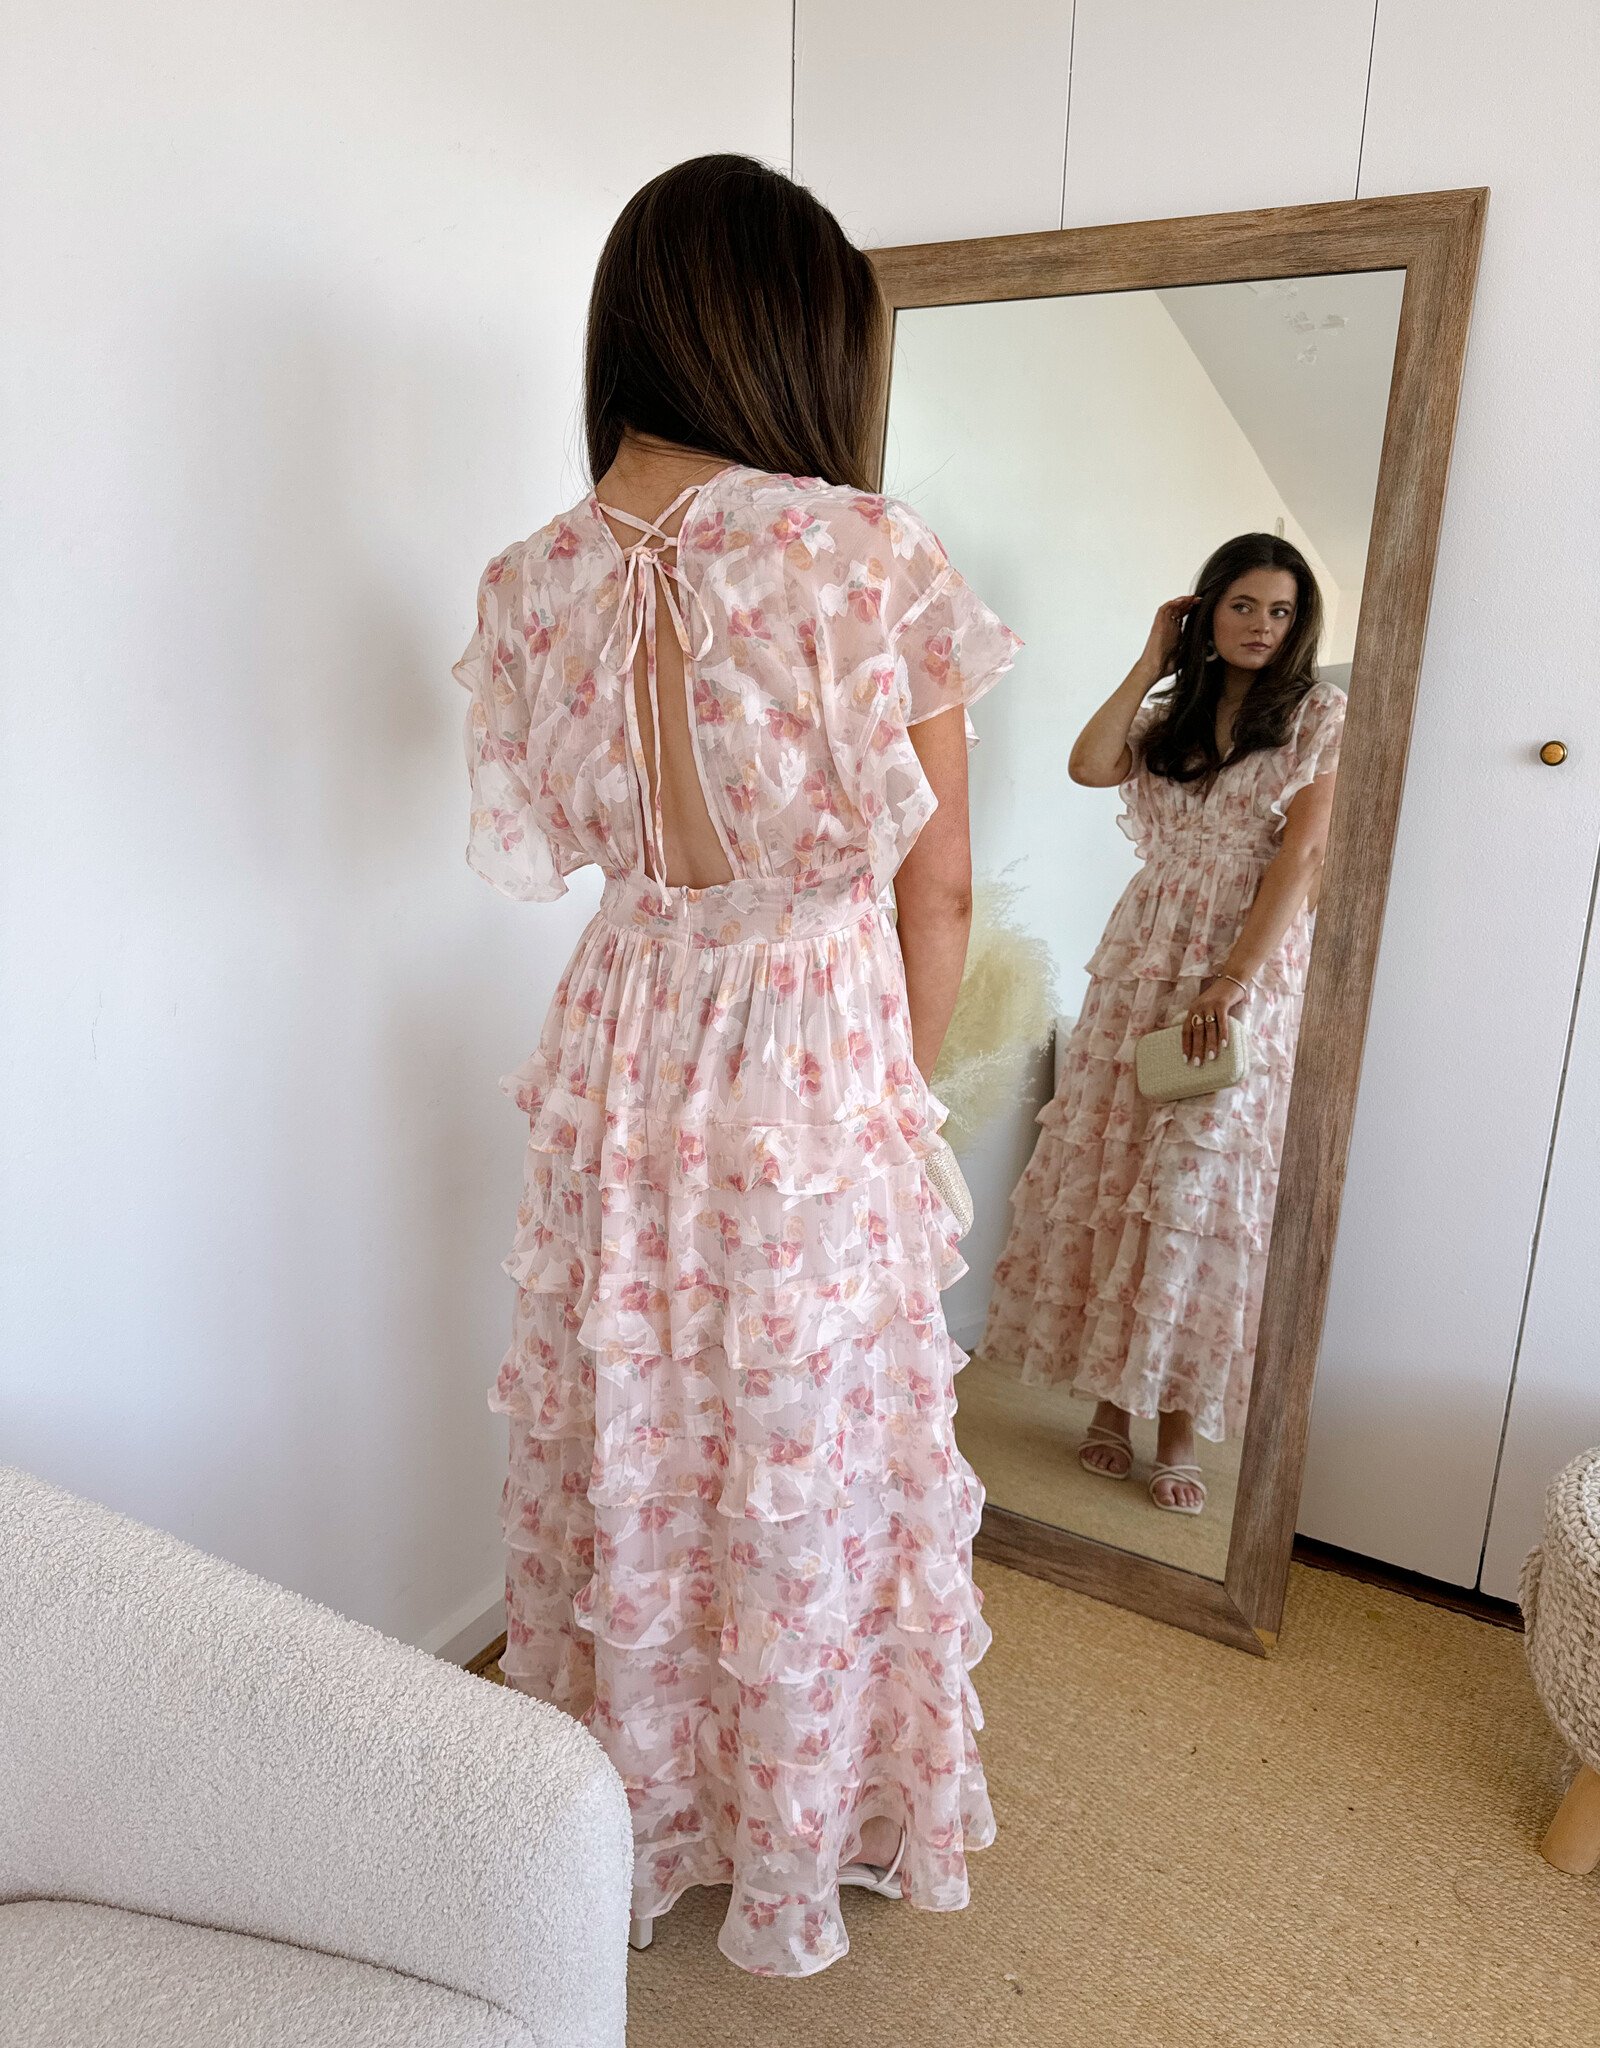 Macy Floral Tiered Maxi Dress